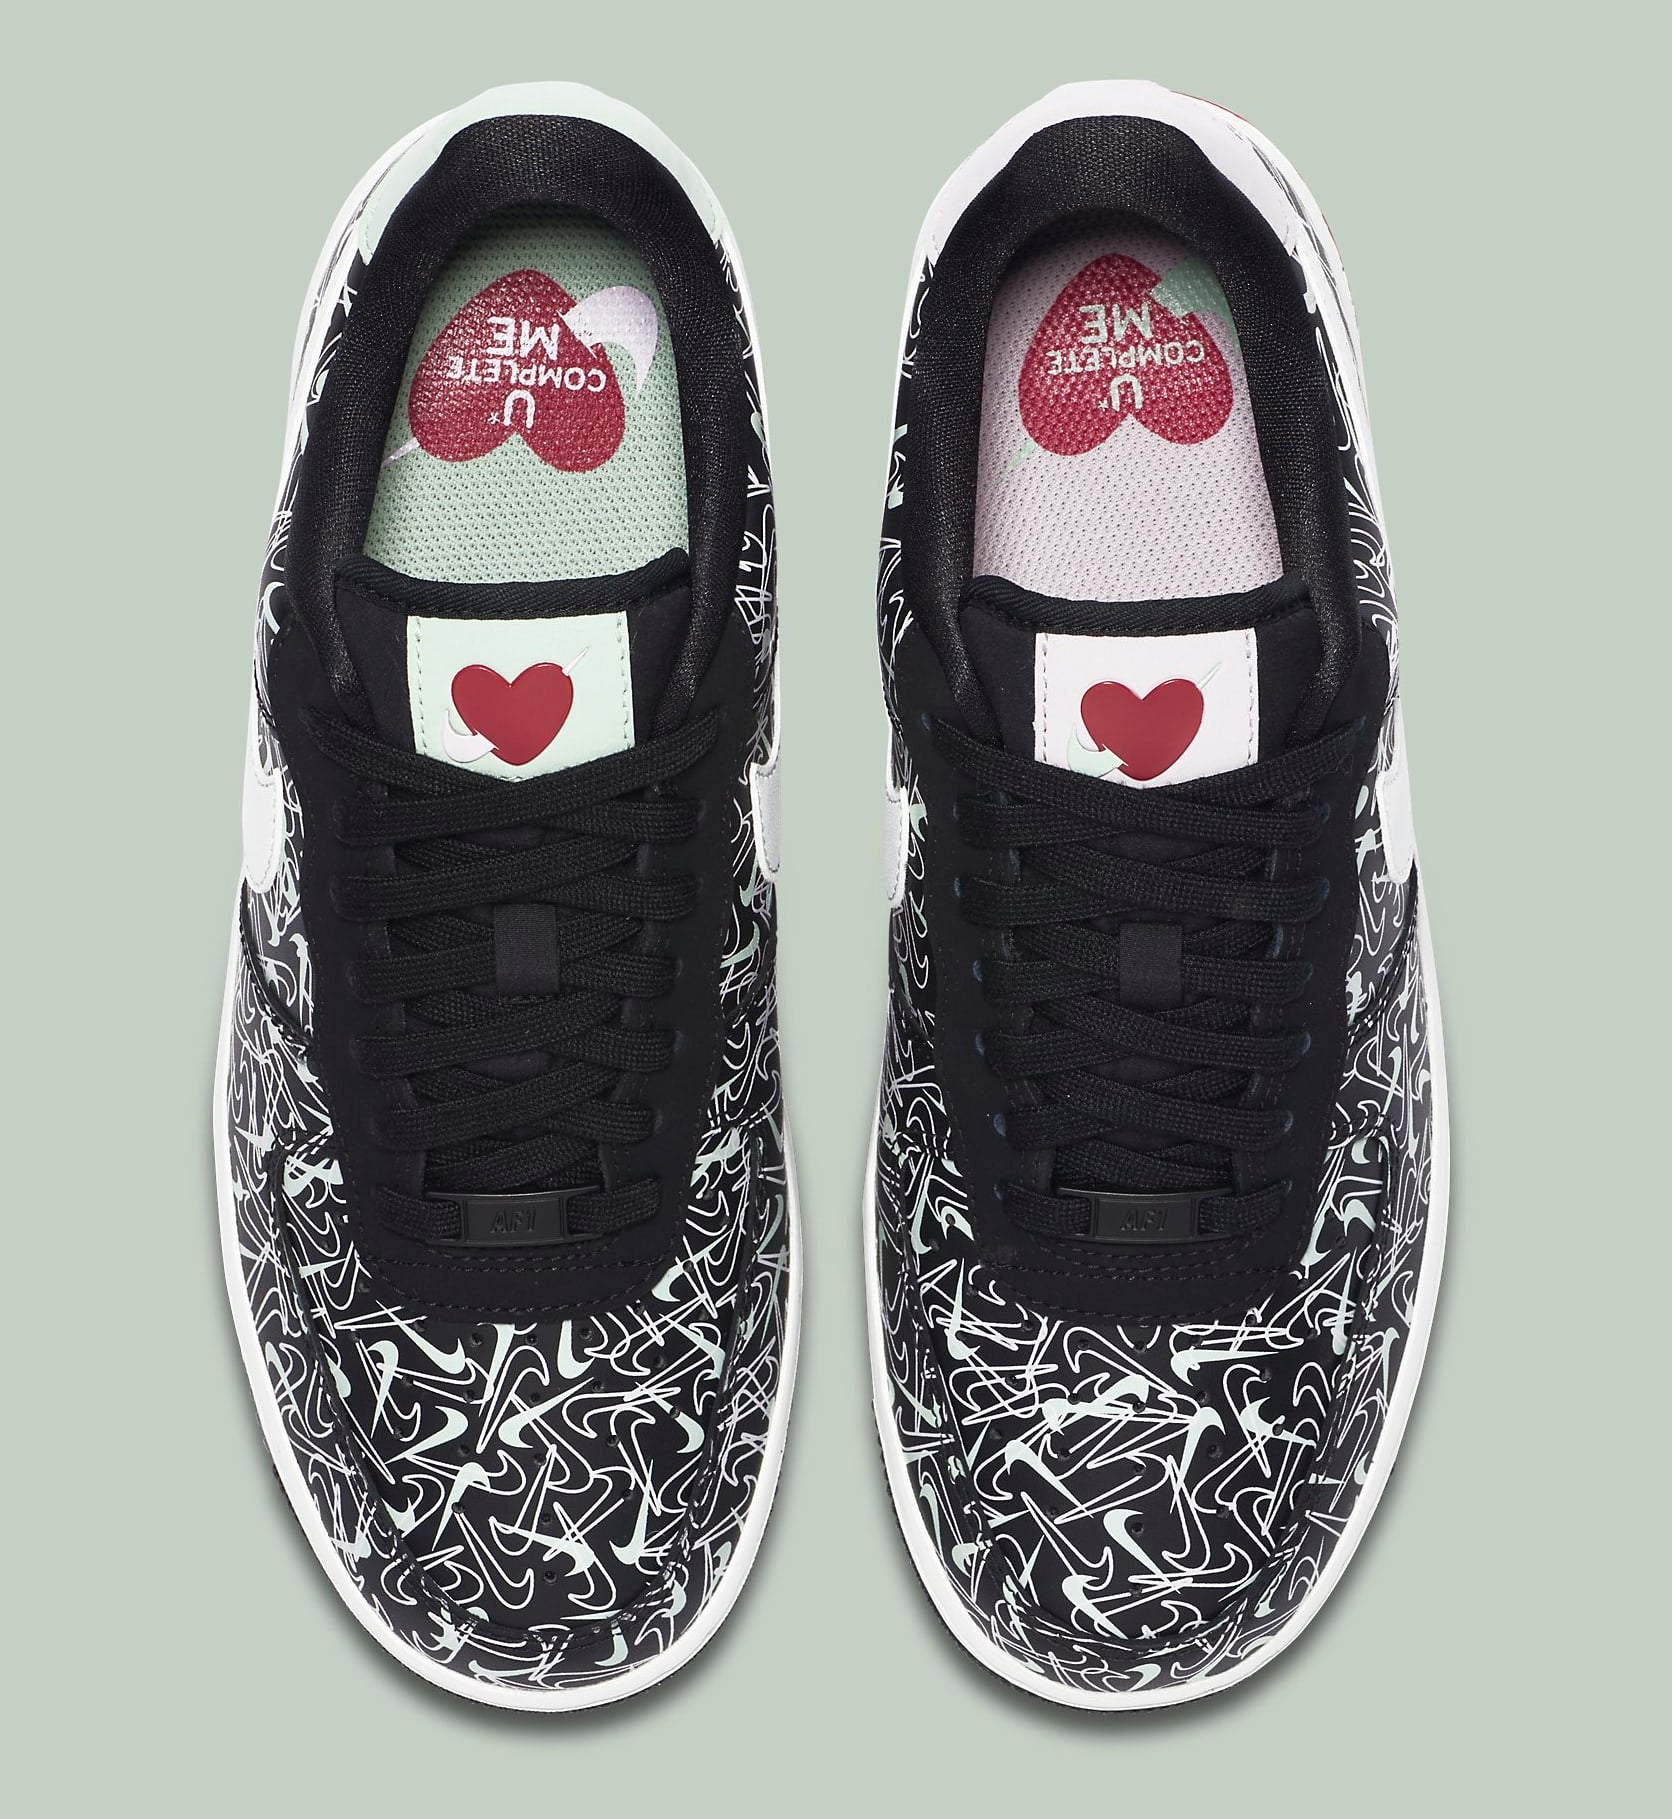 A Little Sneaker Love: Just in Time for Valentine's Day